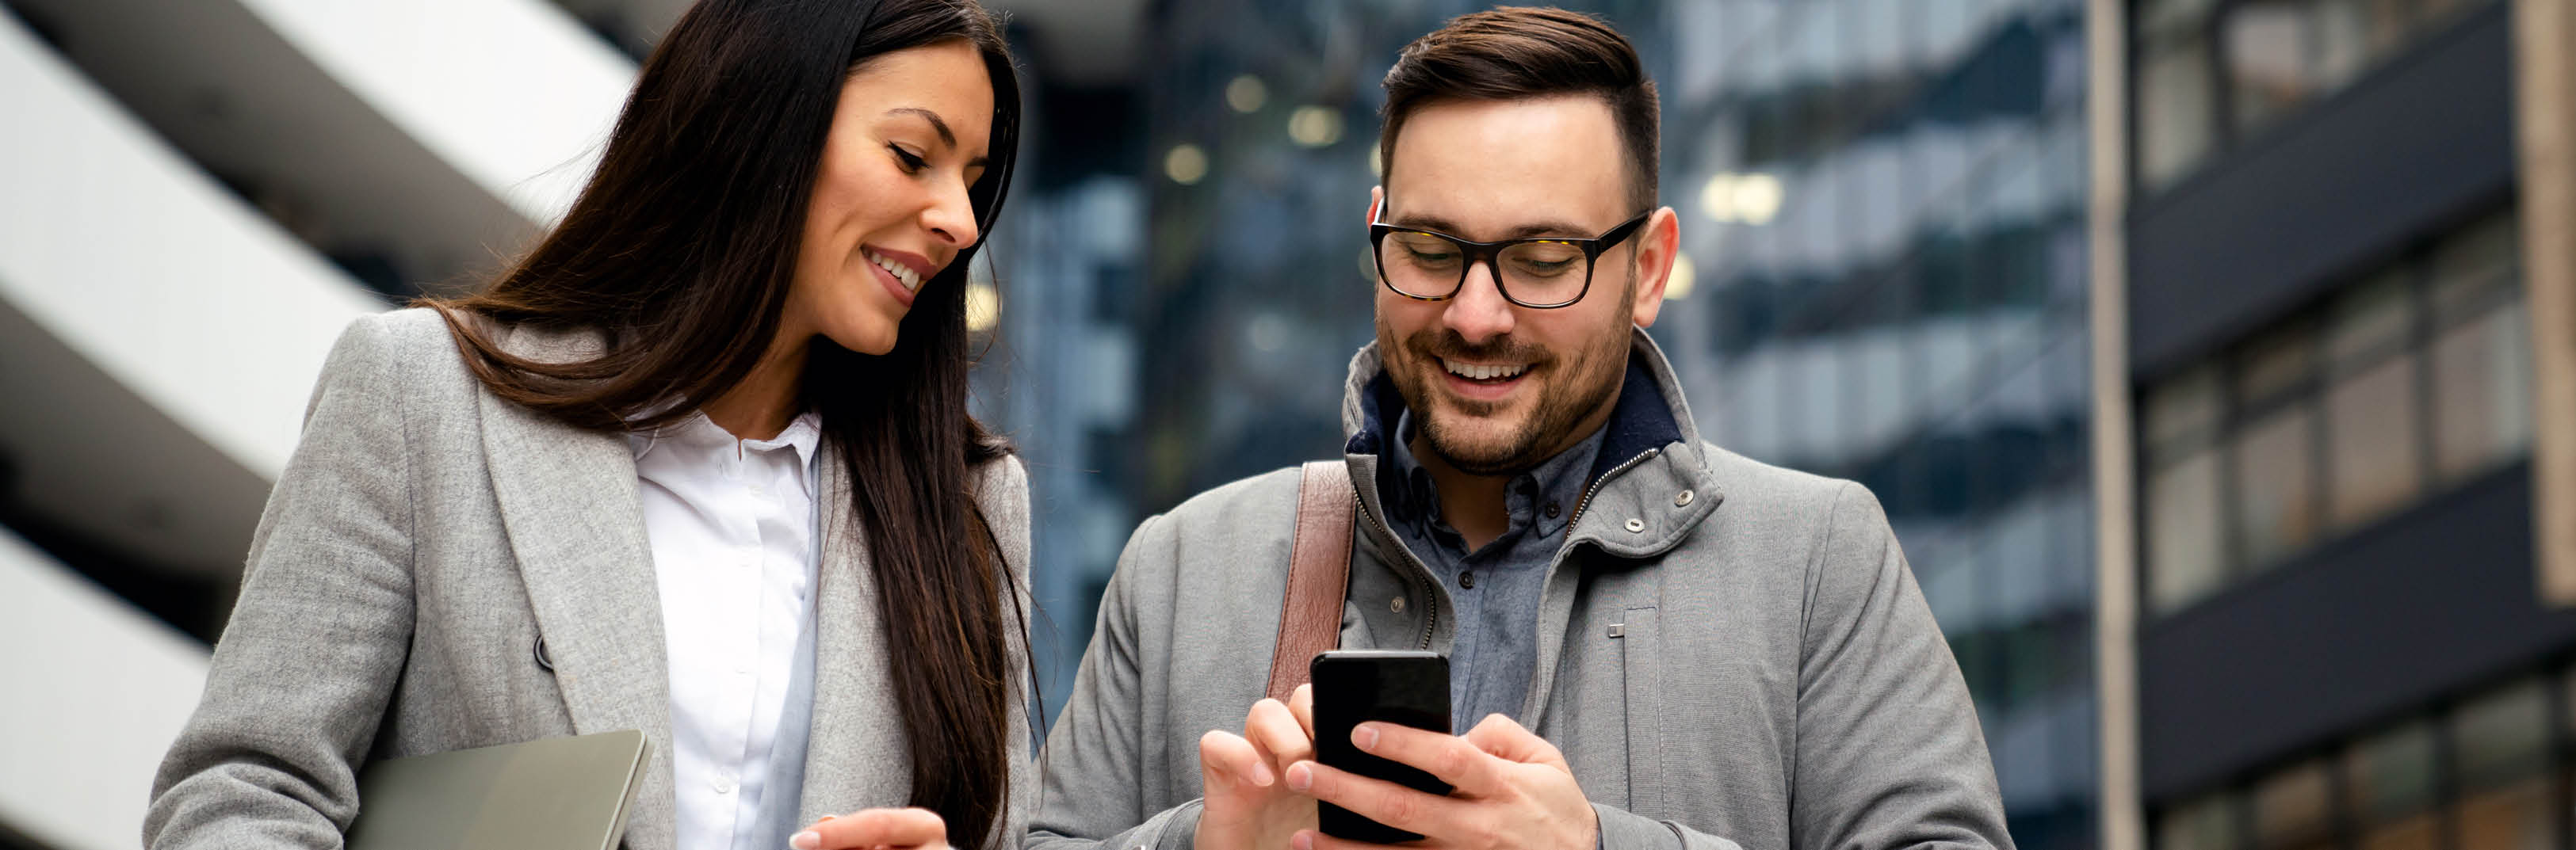 Man and Woman looking at phone smiling_844x279(ID#546494662 _AS)